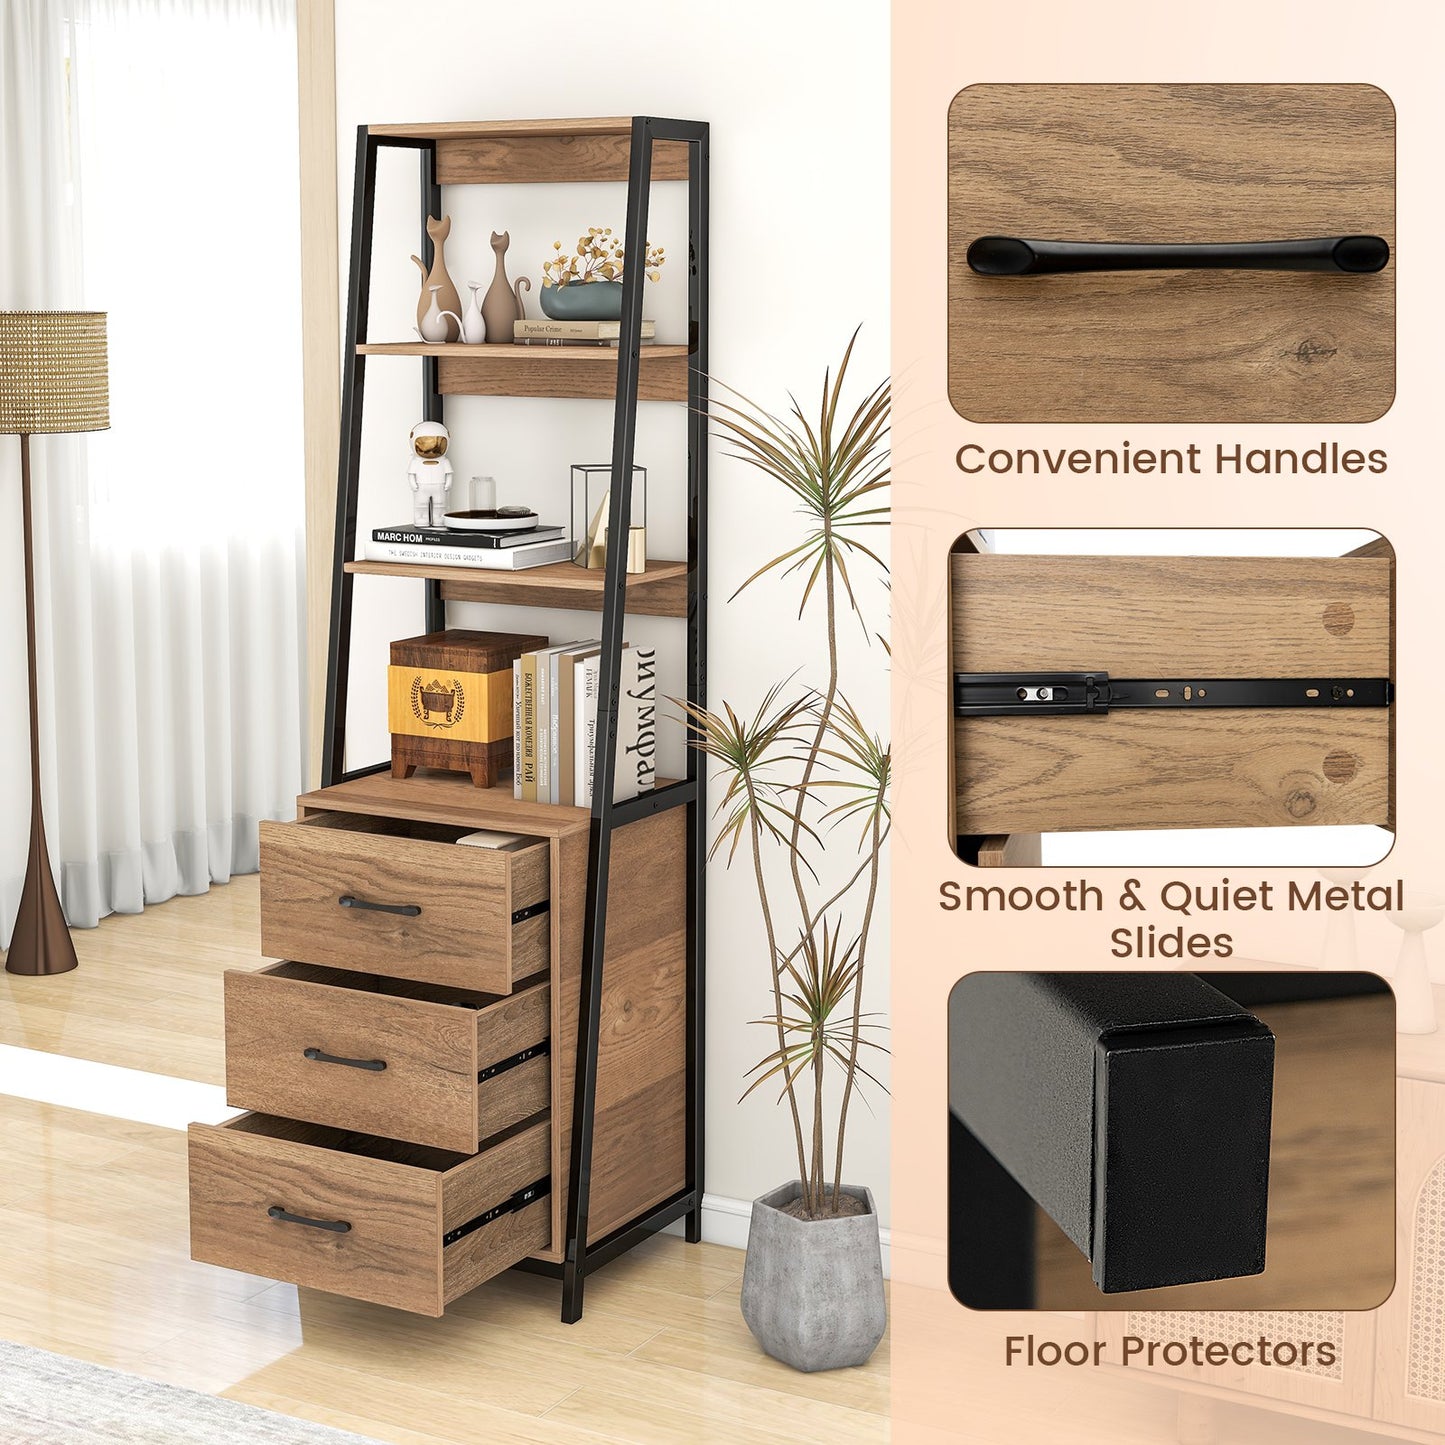 Multifunctional Tall Bookcase with Open Shelves and Storage Drawers, Natural